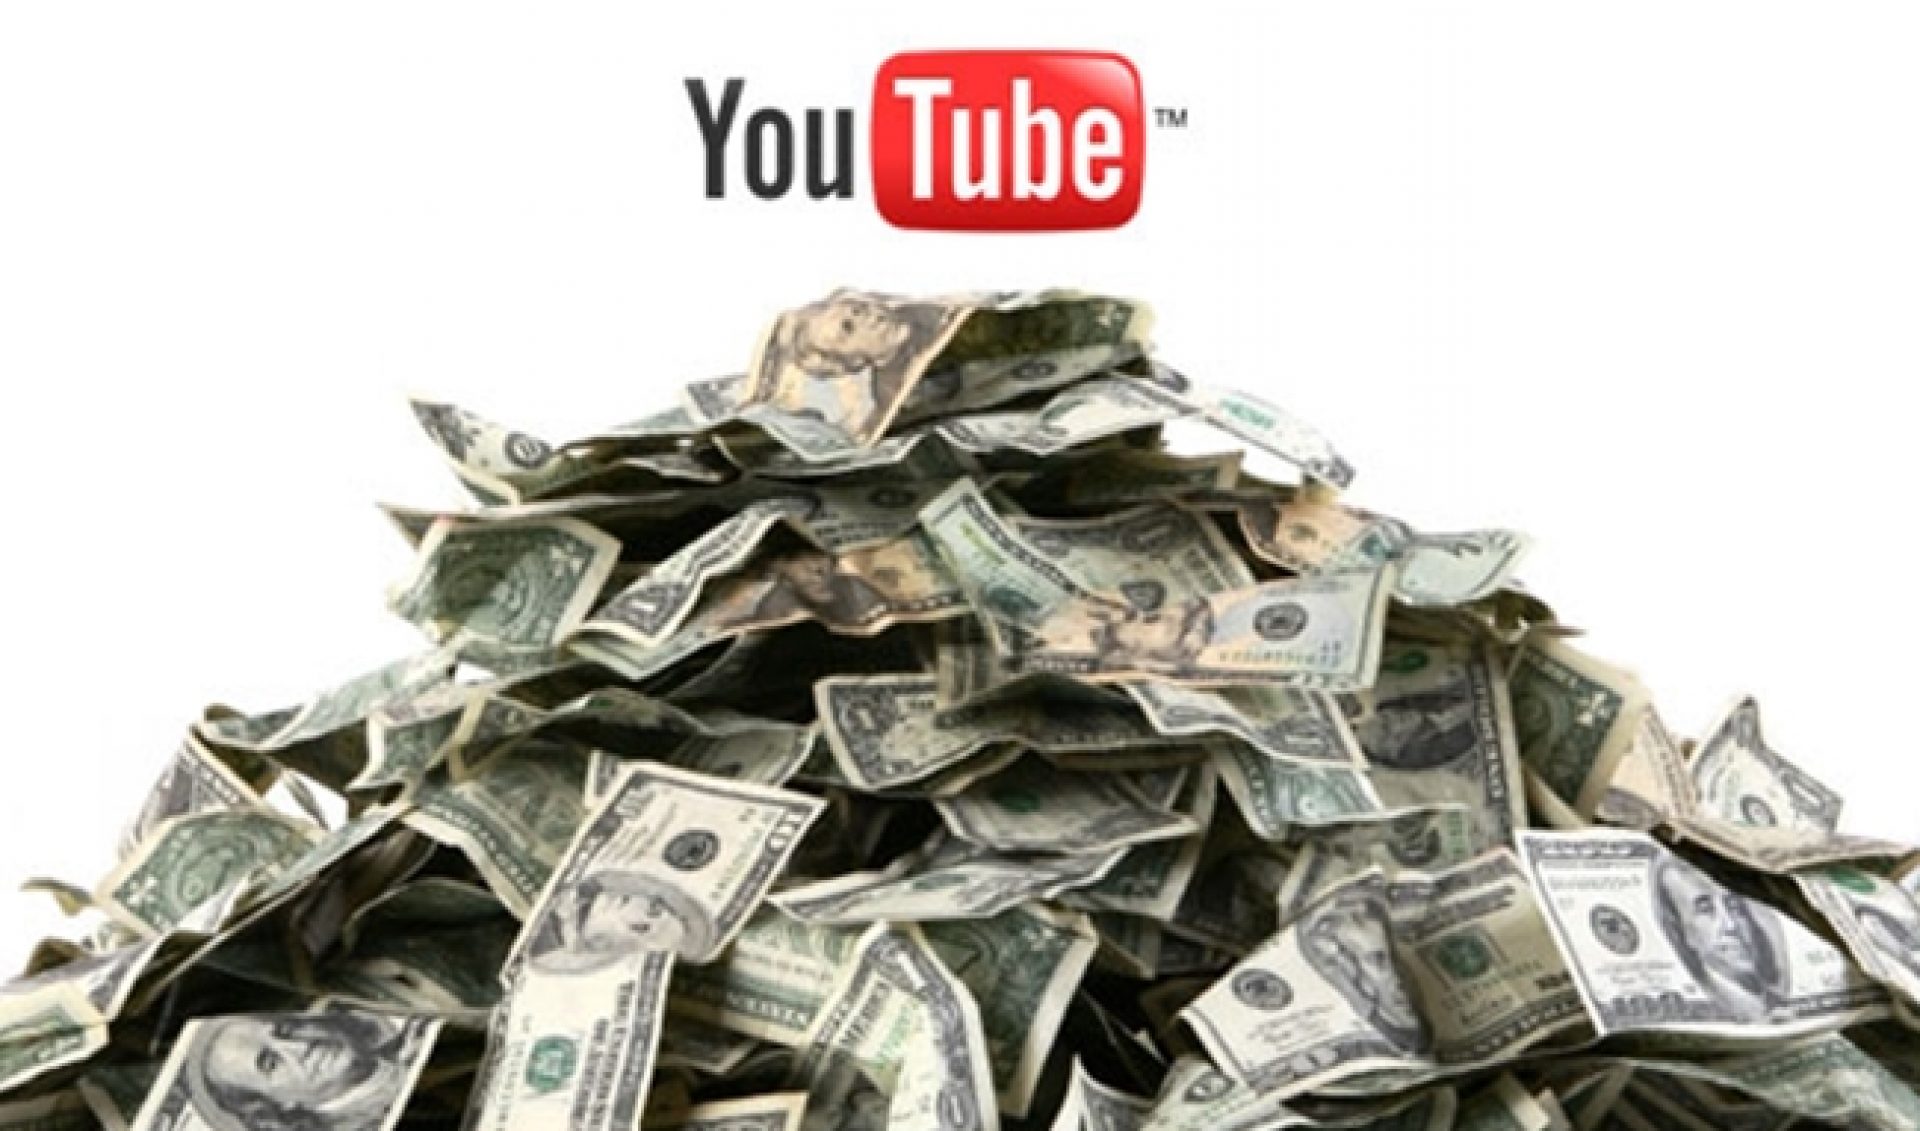 The Average YouTube CPM Is $7.60, But Making Money Isn’t Easy